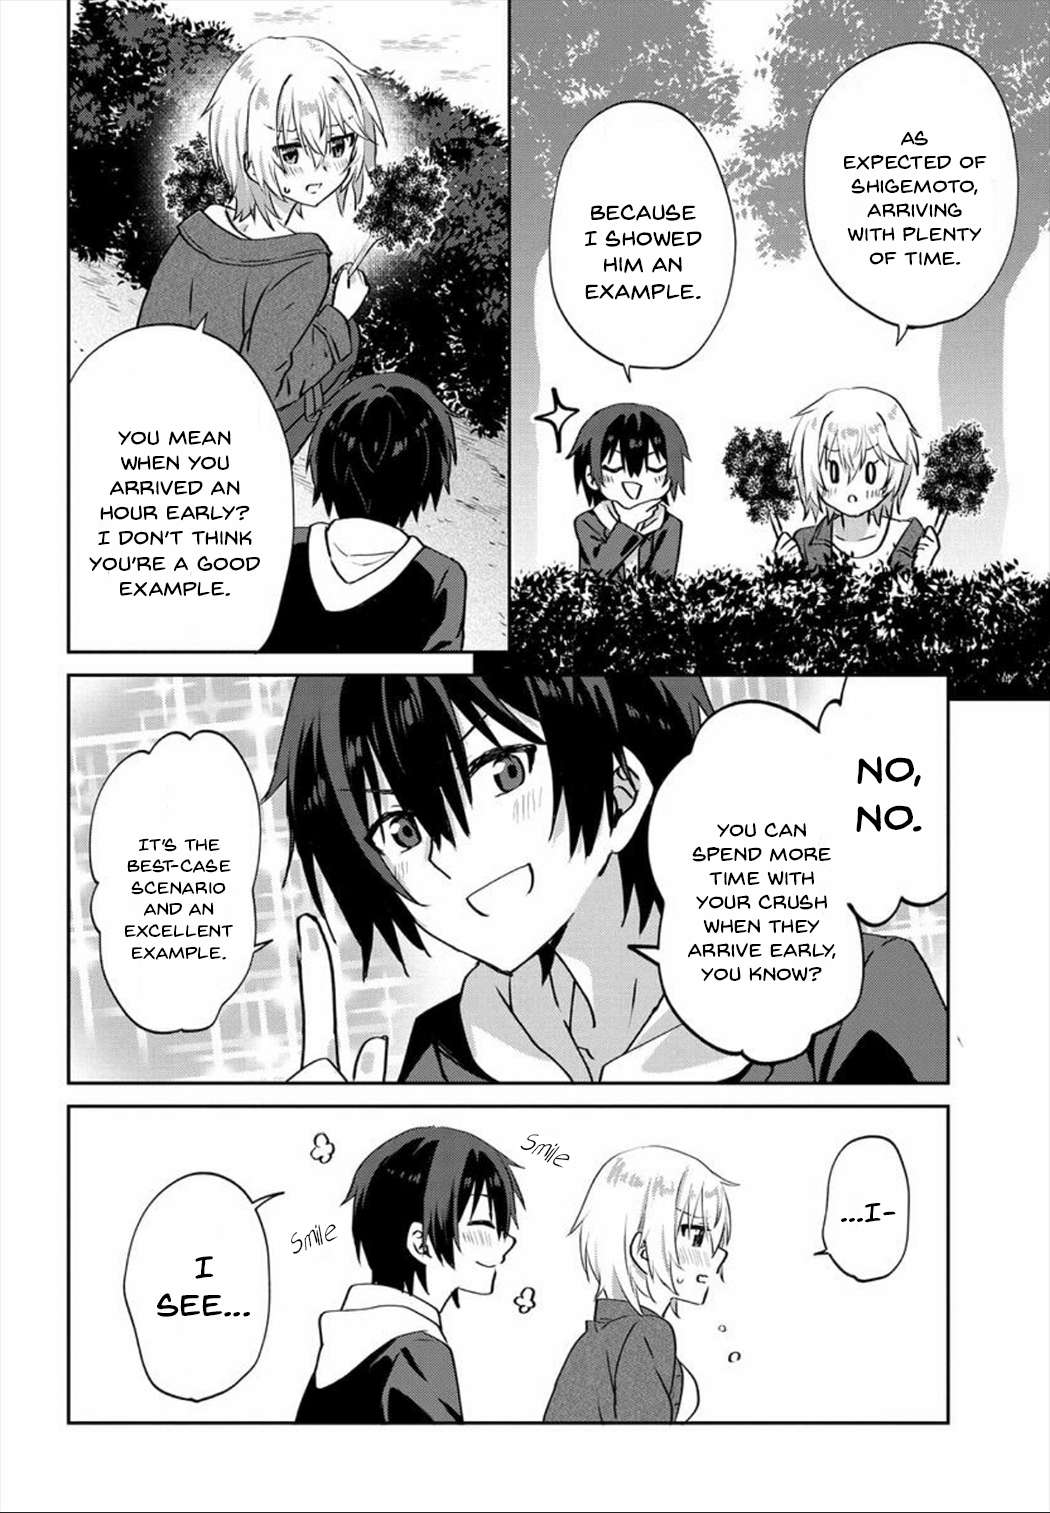 Since I’ve Entered the World of Romantic Comedy Manga, I’ll Do My Best to Make the Losing Heroine Happy. - chapter 6.2 - #5